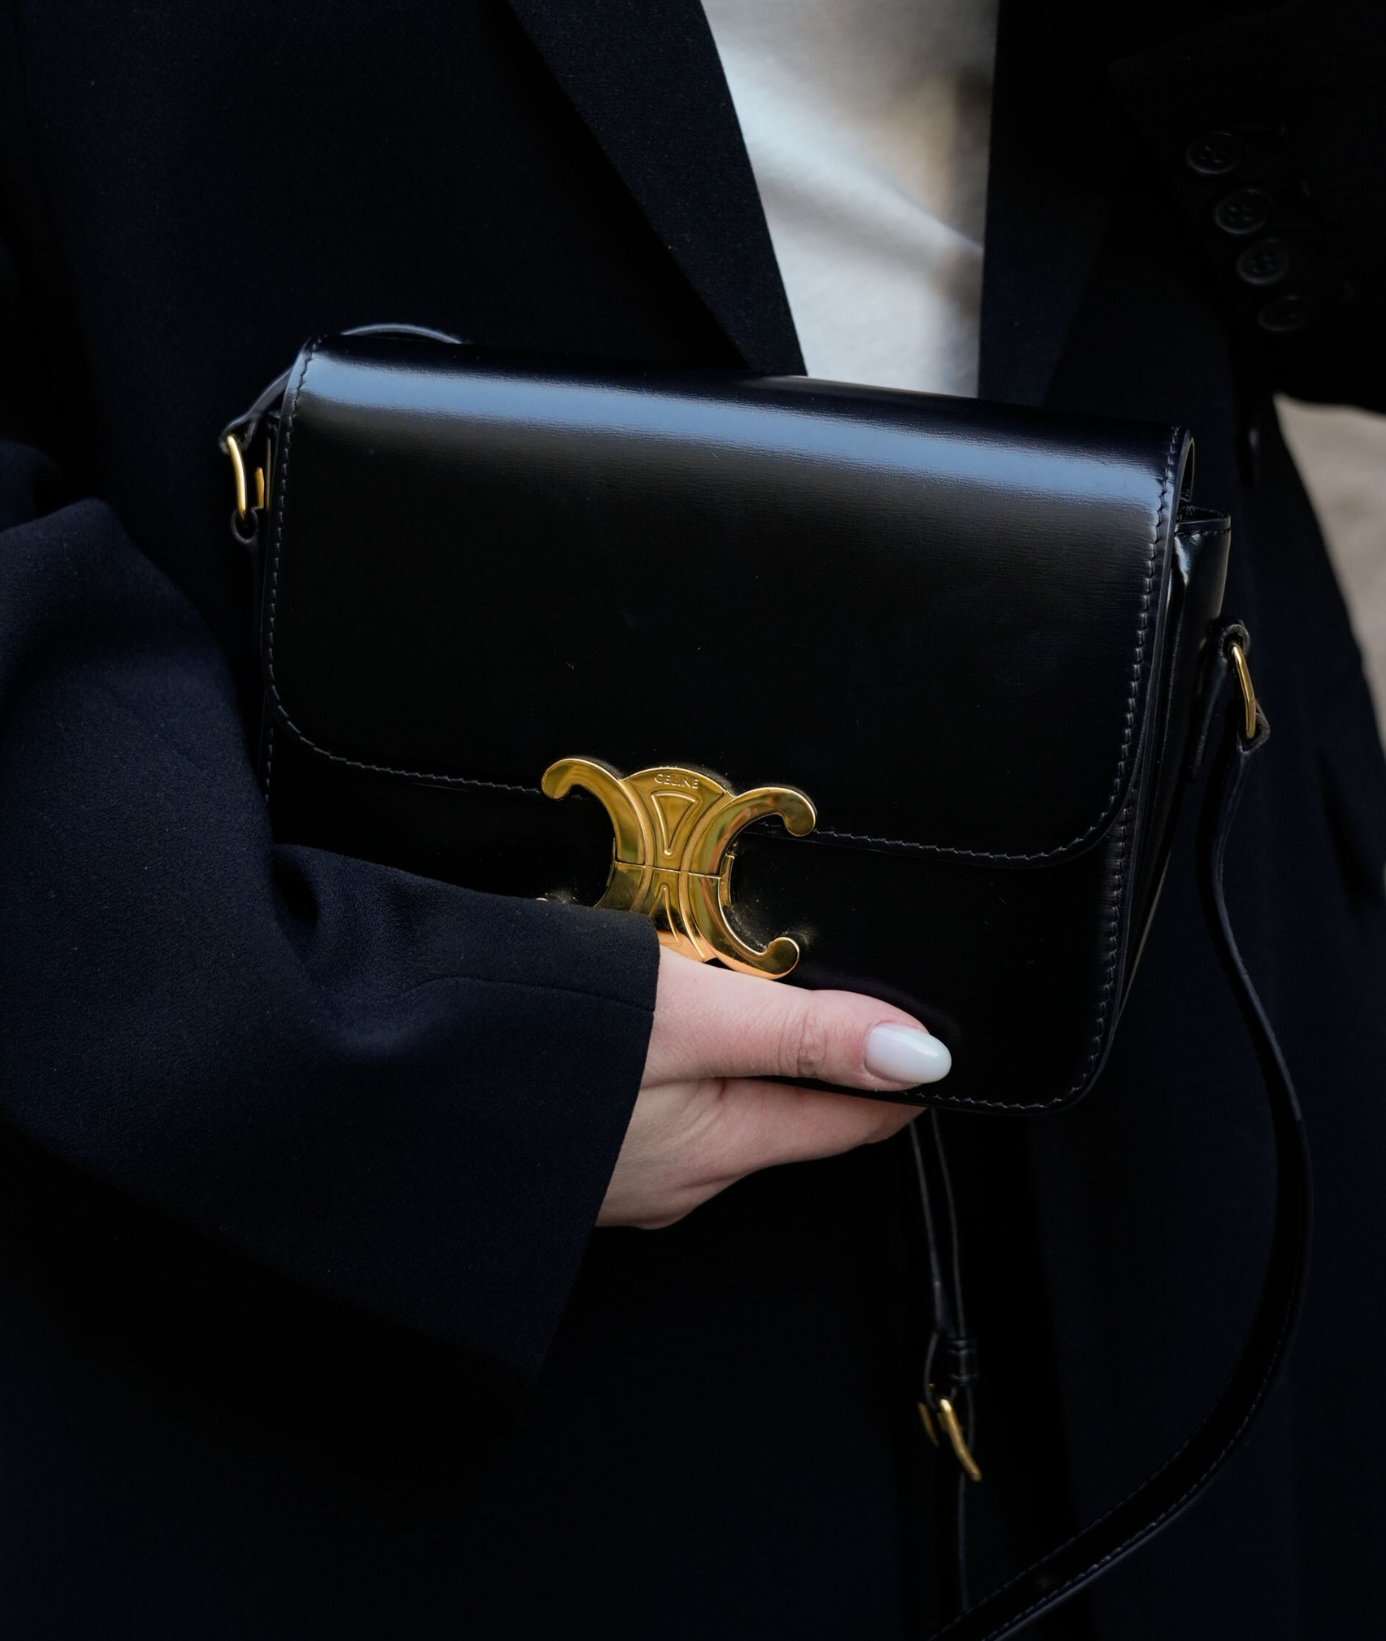 Kering Invests in Luxury Handbag Rental Company Cocoon, as Younger  Consumers Look to the Sharing Economy - The Fashion Law